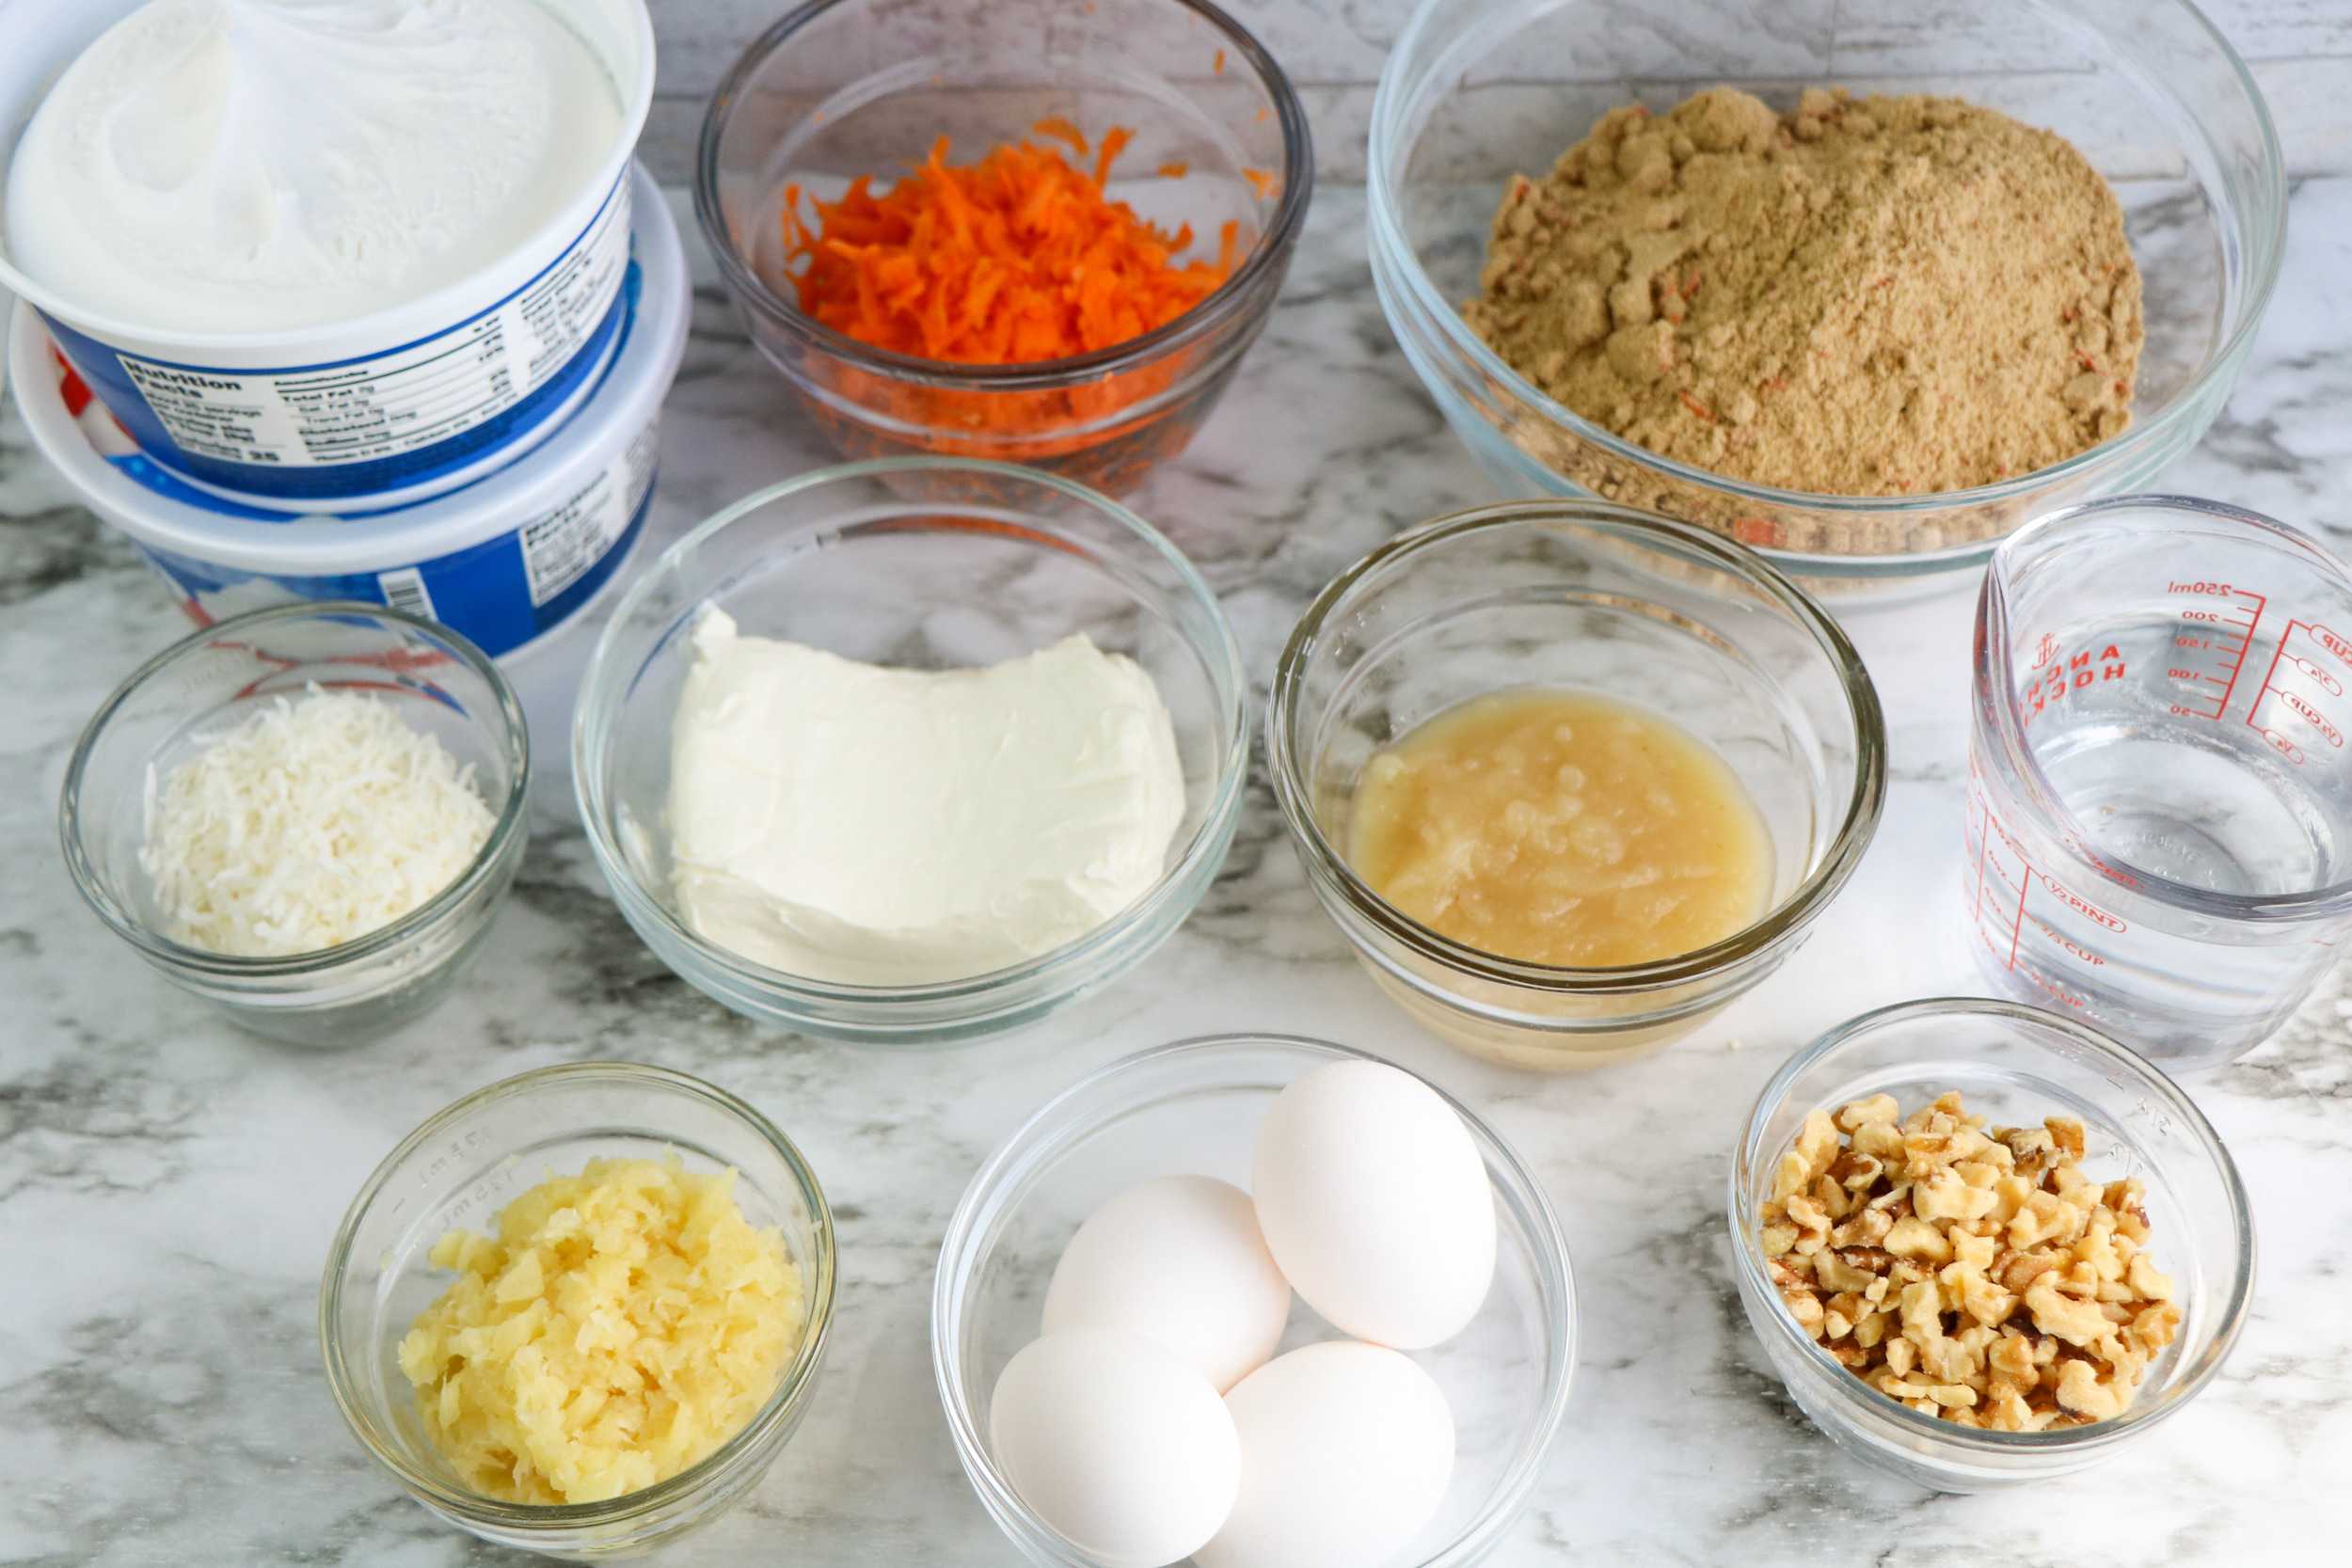 Ingredients for Carrot Cake Trifle